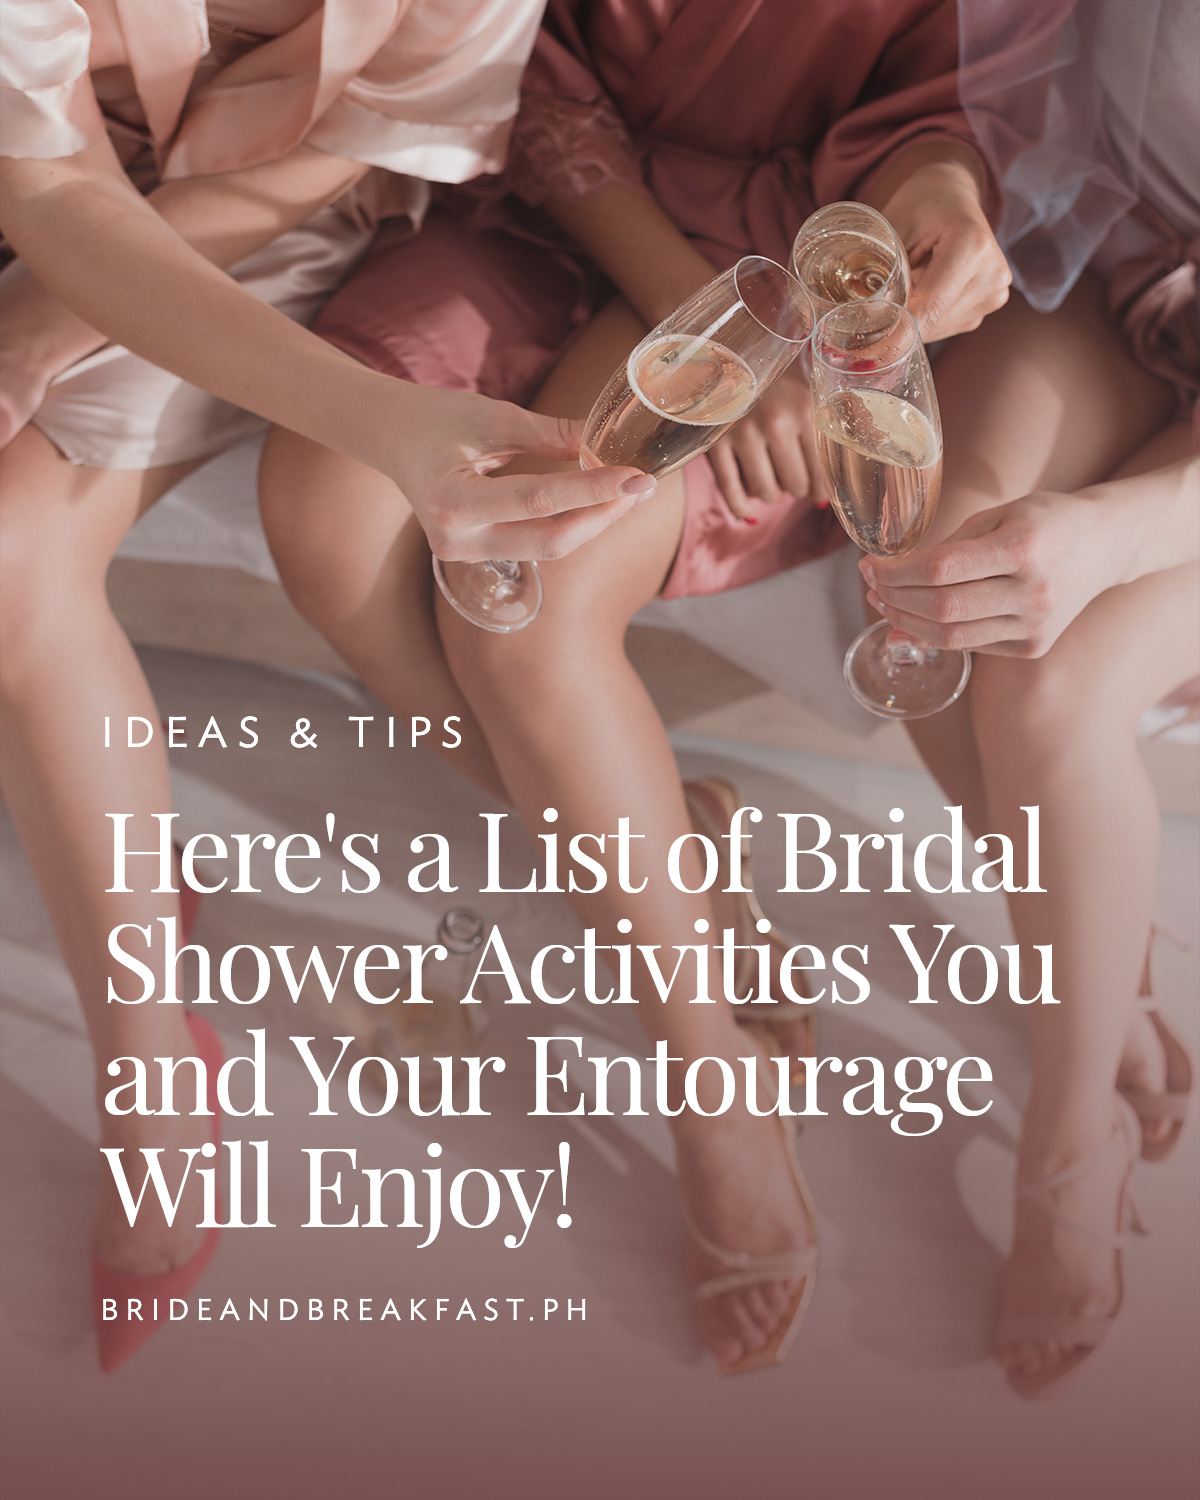 Here's a List of Bridal Shower Activities You and Your Entourage Will Enjoy!